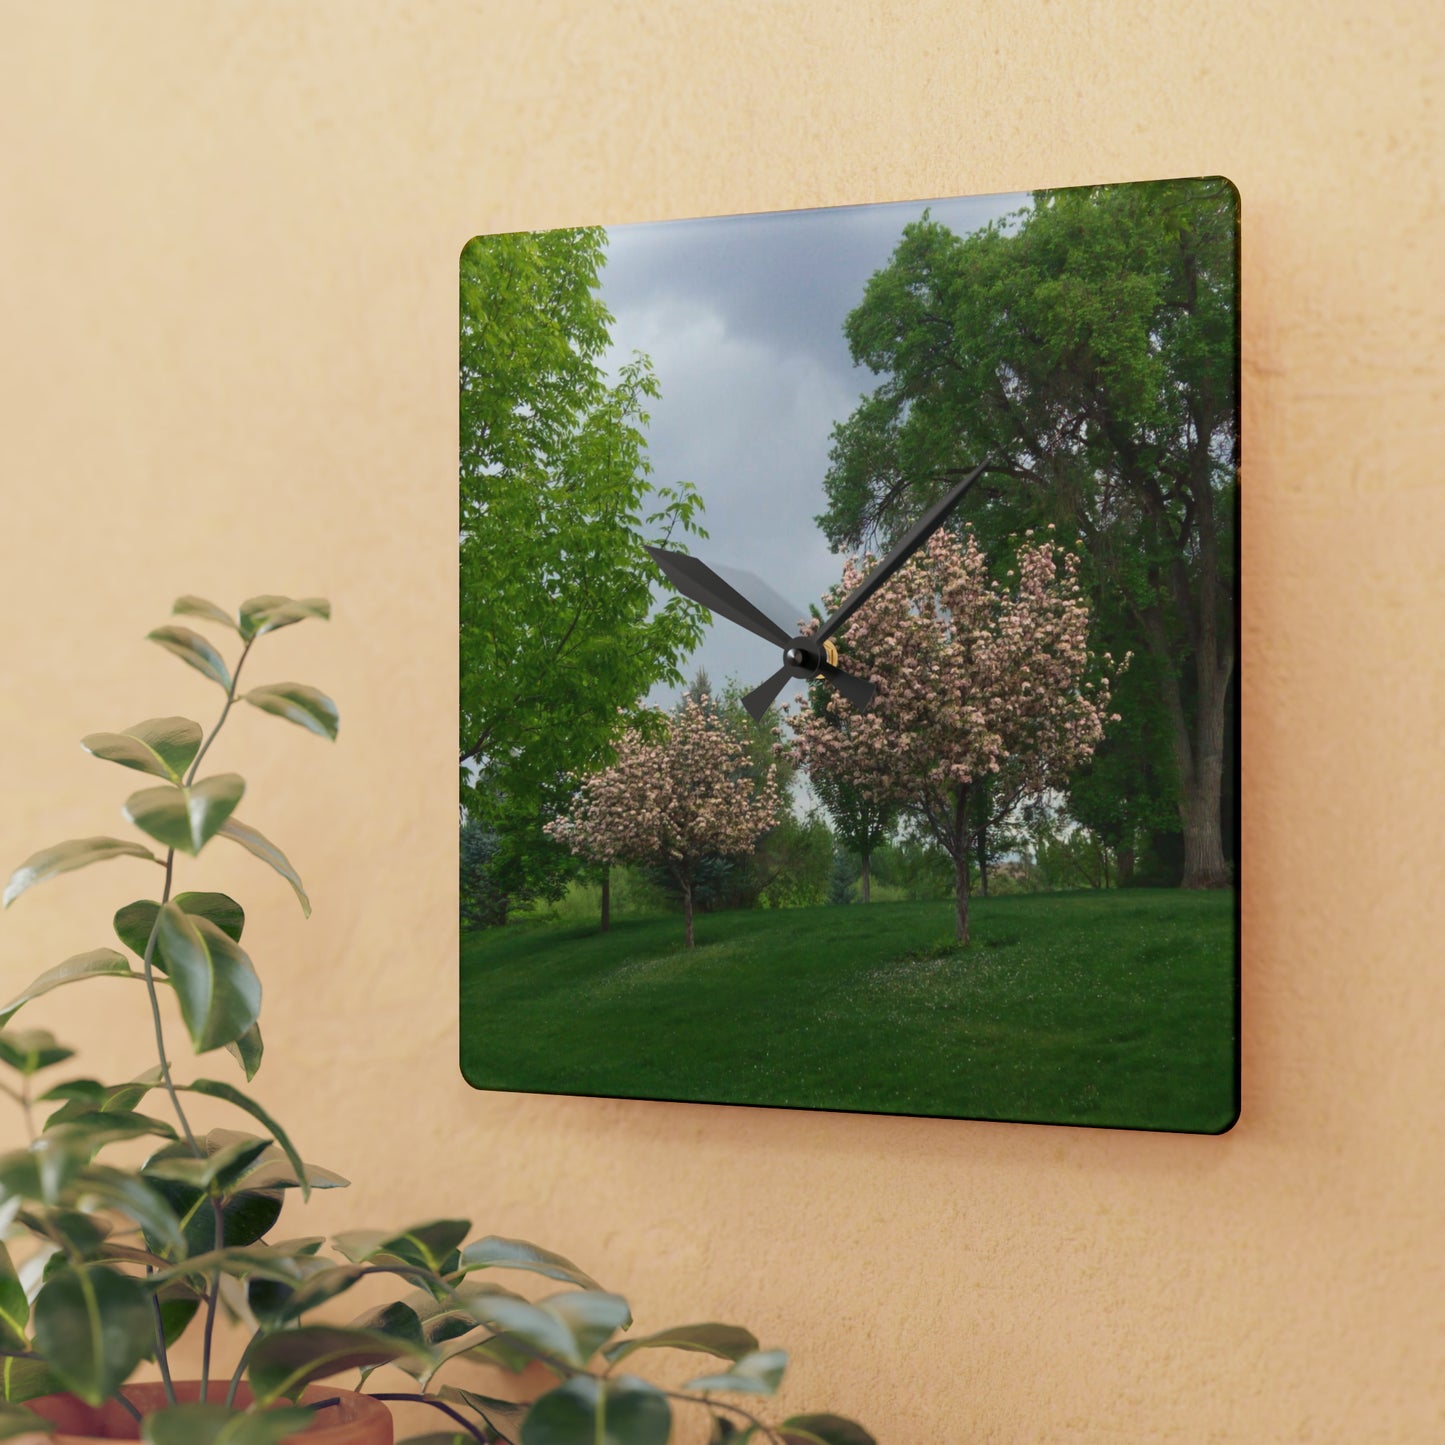 Spring In The Air Acrylic Wall Clock